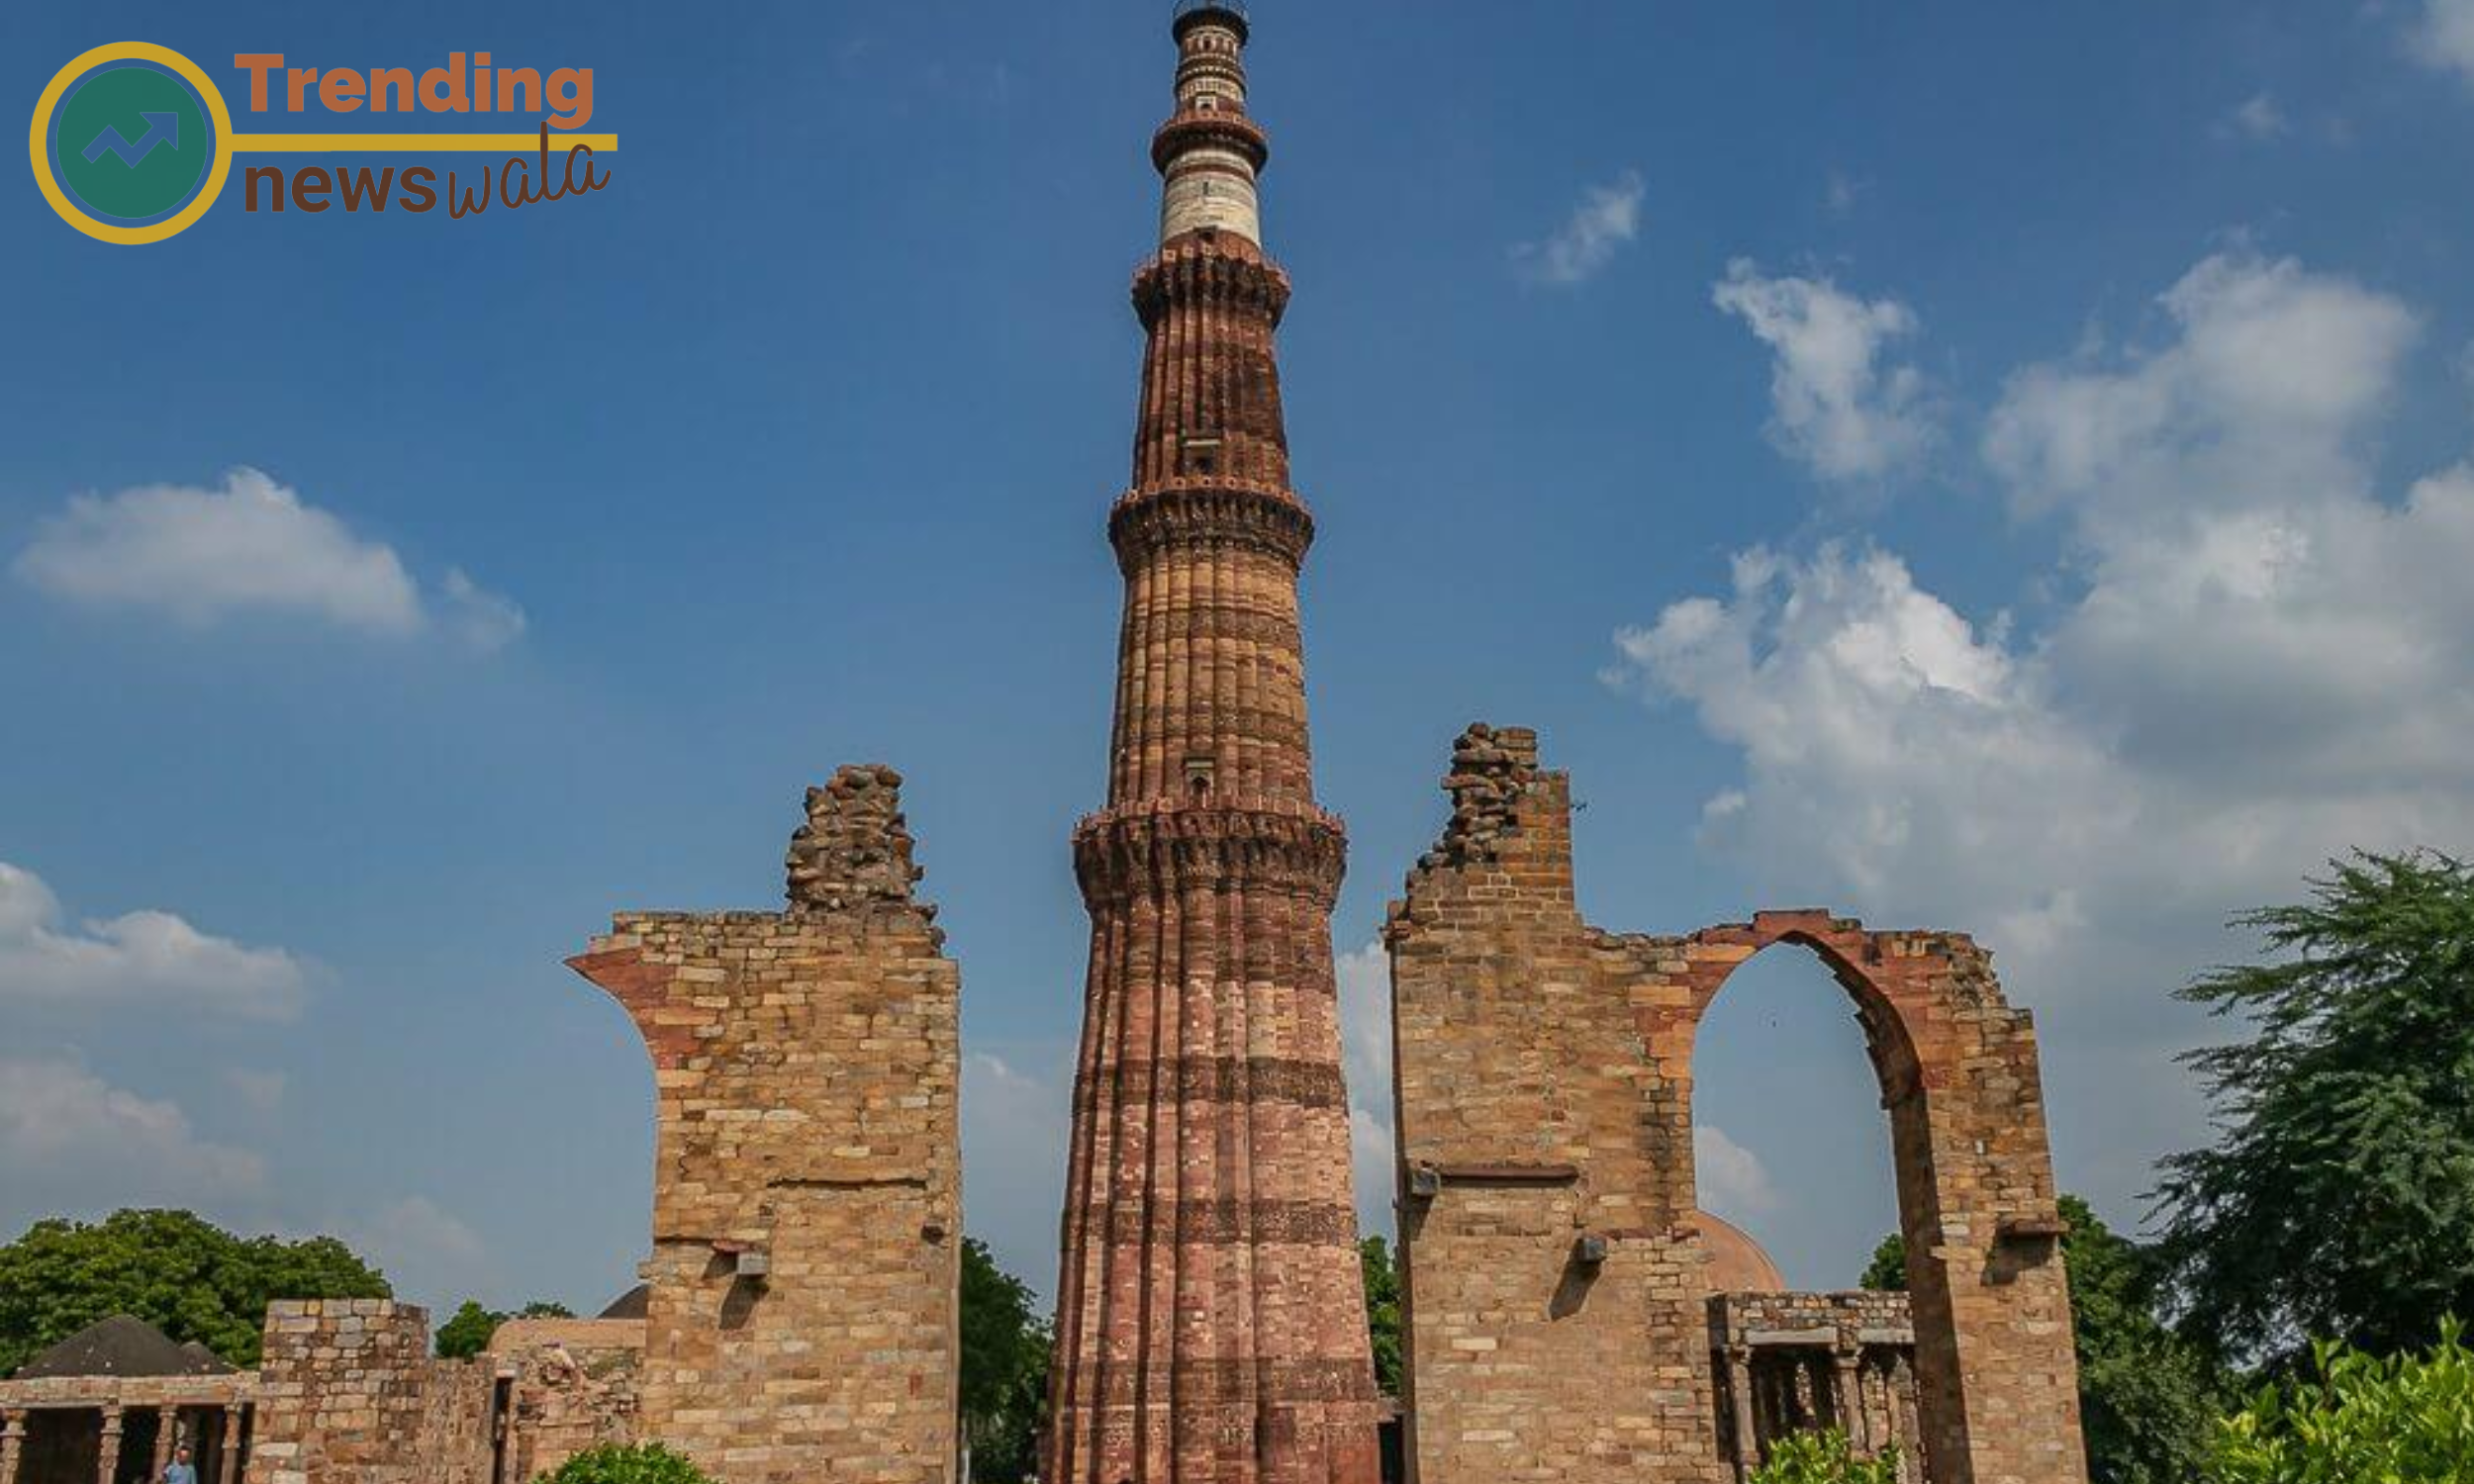  The Qutub Complex are rich in architectural features and symbolism